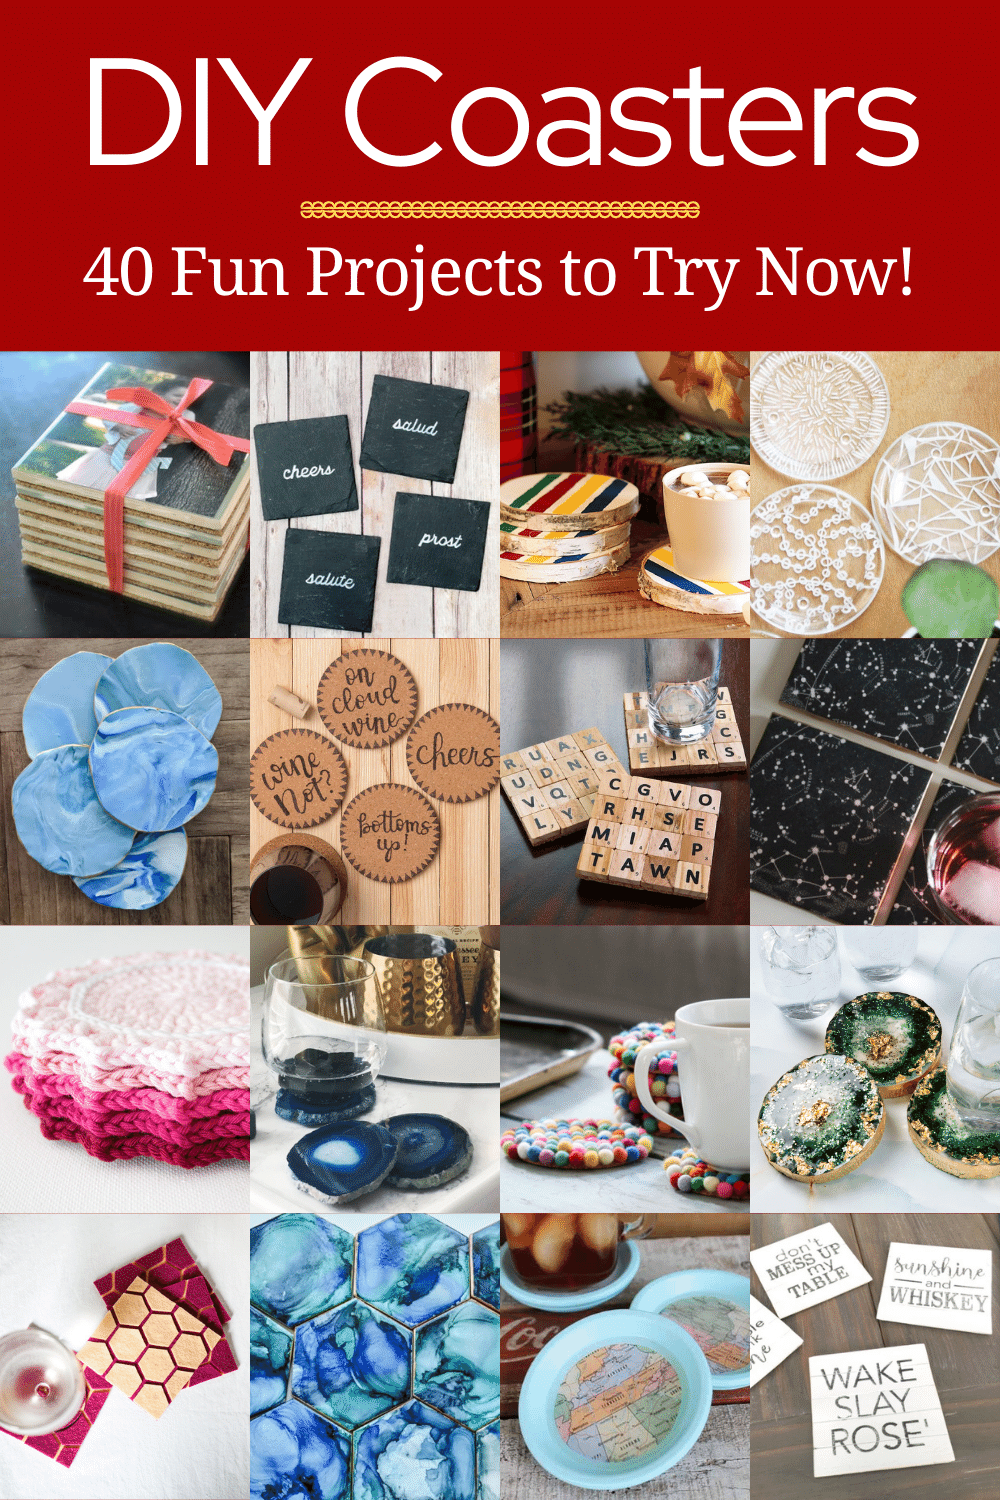 DIY Coasters: 40 fun projects to try